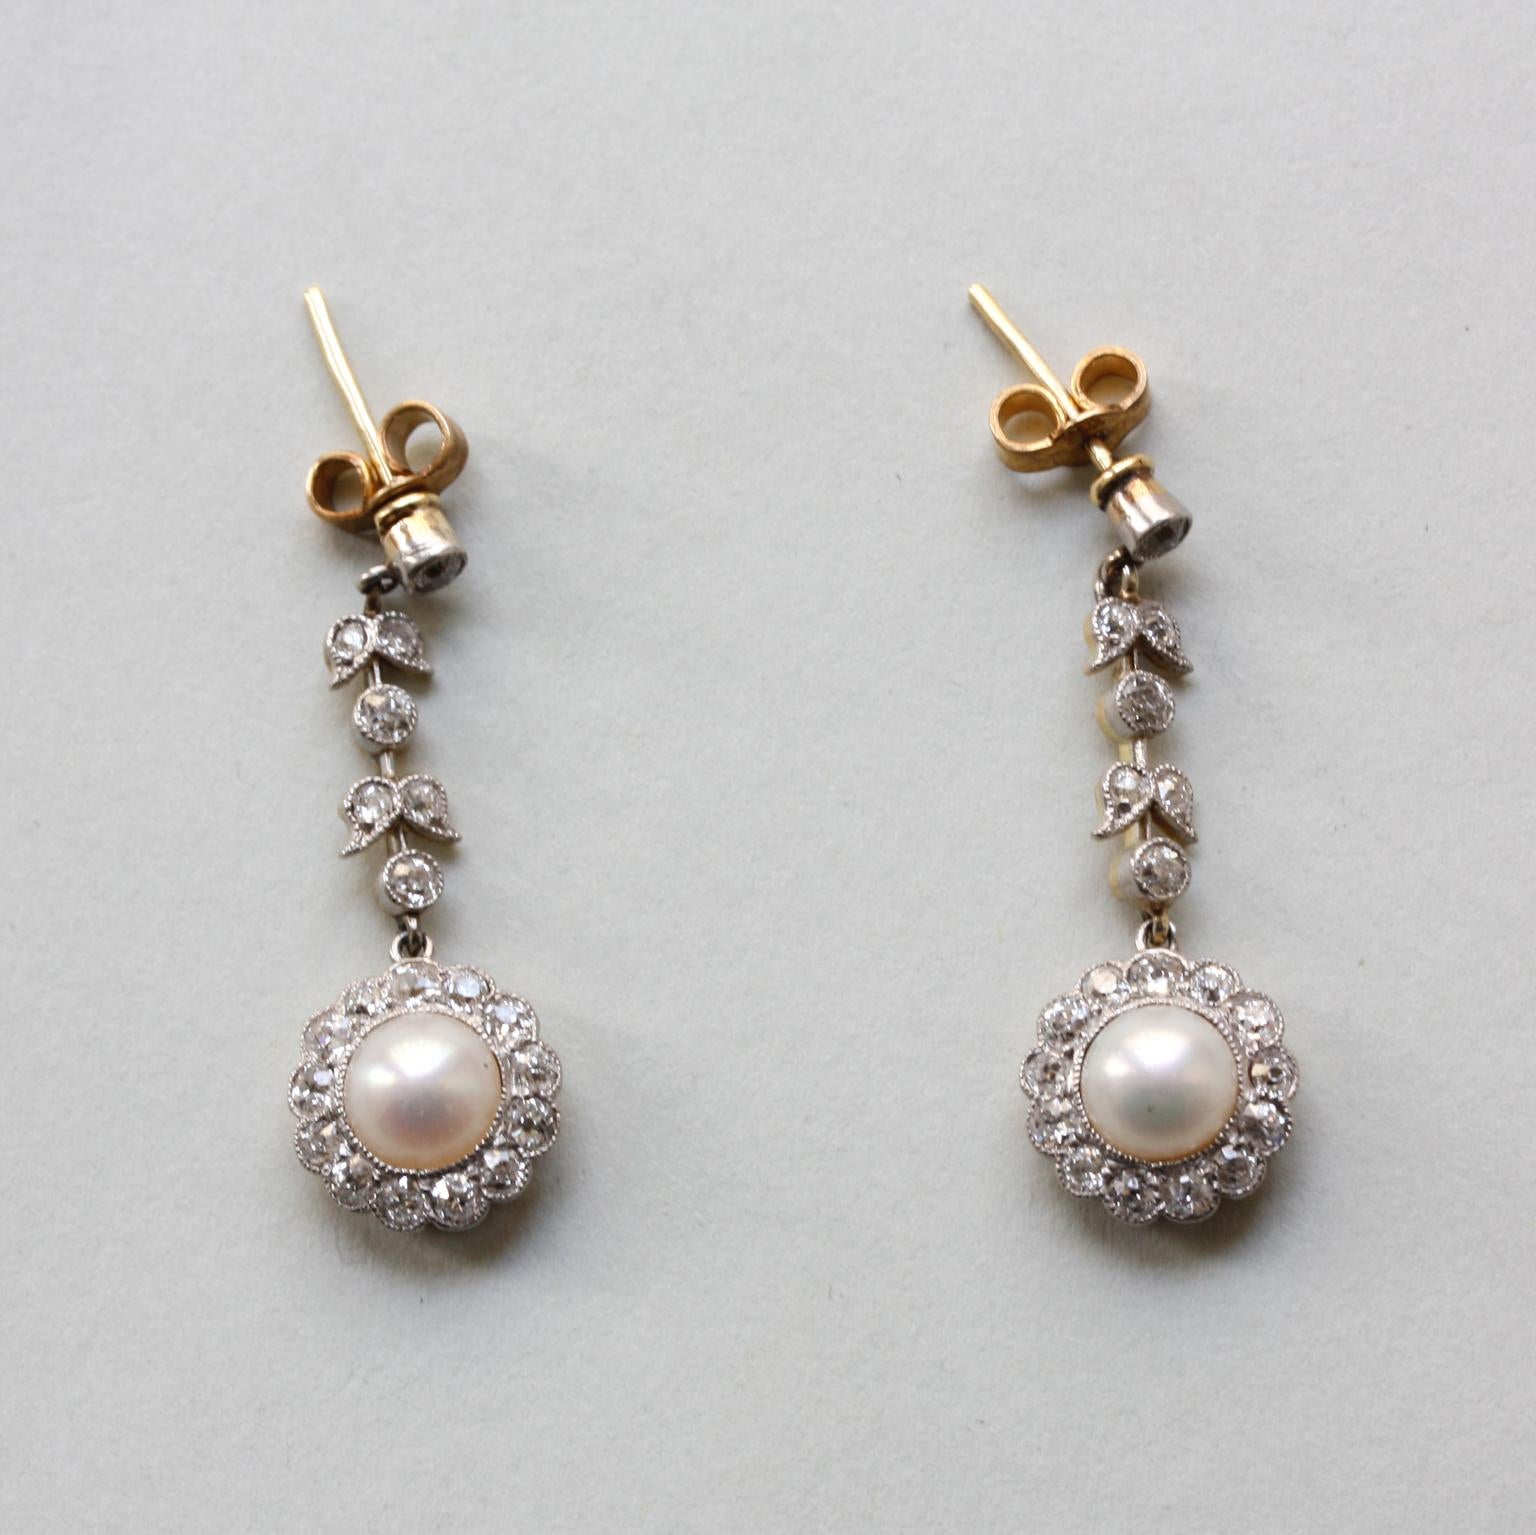 A pair of Edwardian gold earrings with a platinum mille griffe set white bouton pearl and a cluster of 13 old-cut diamonds around it, hanging from a guirlande with leaves also with old-cut diamonds. England, circa 1915.

Weight: 4.00